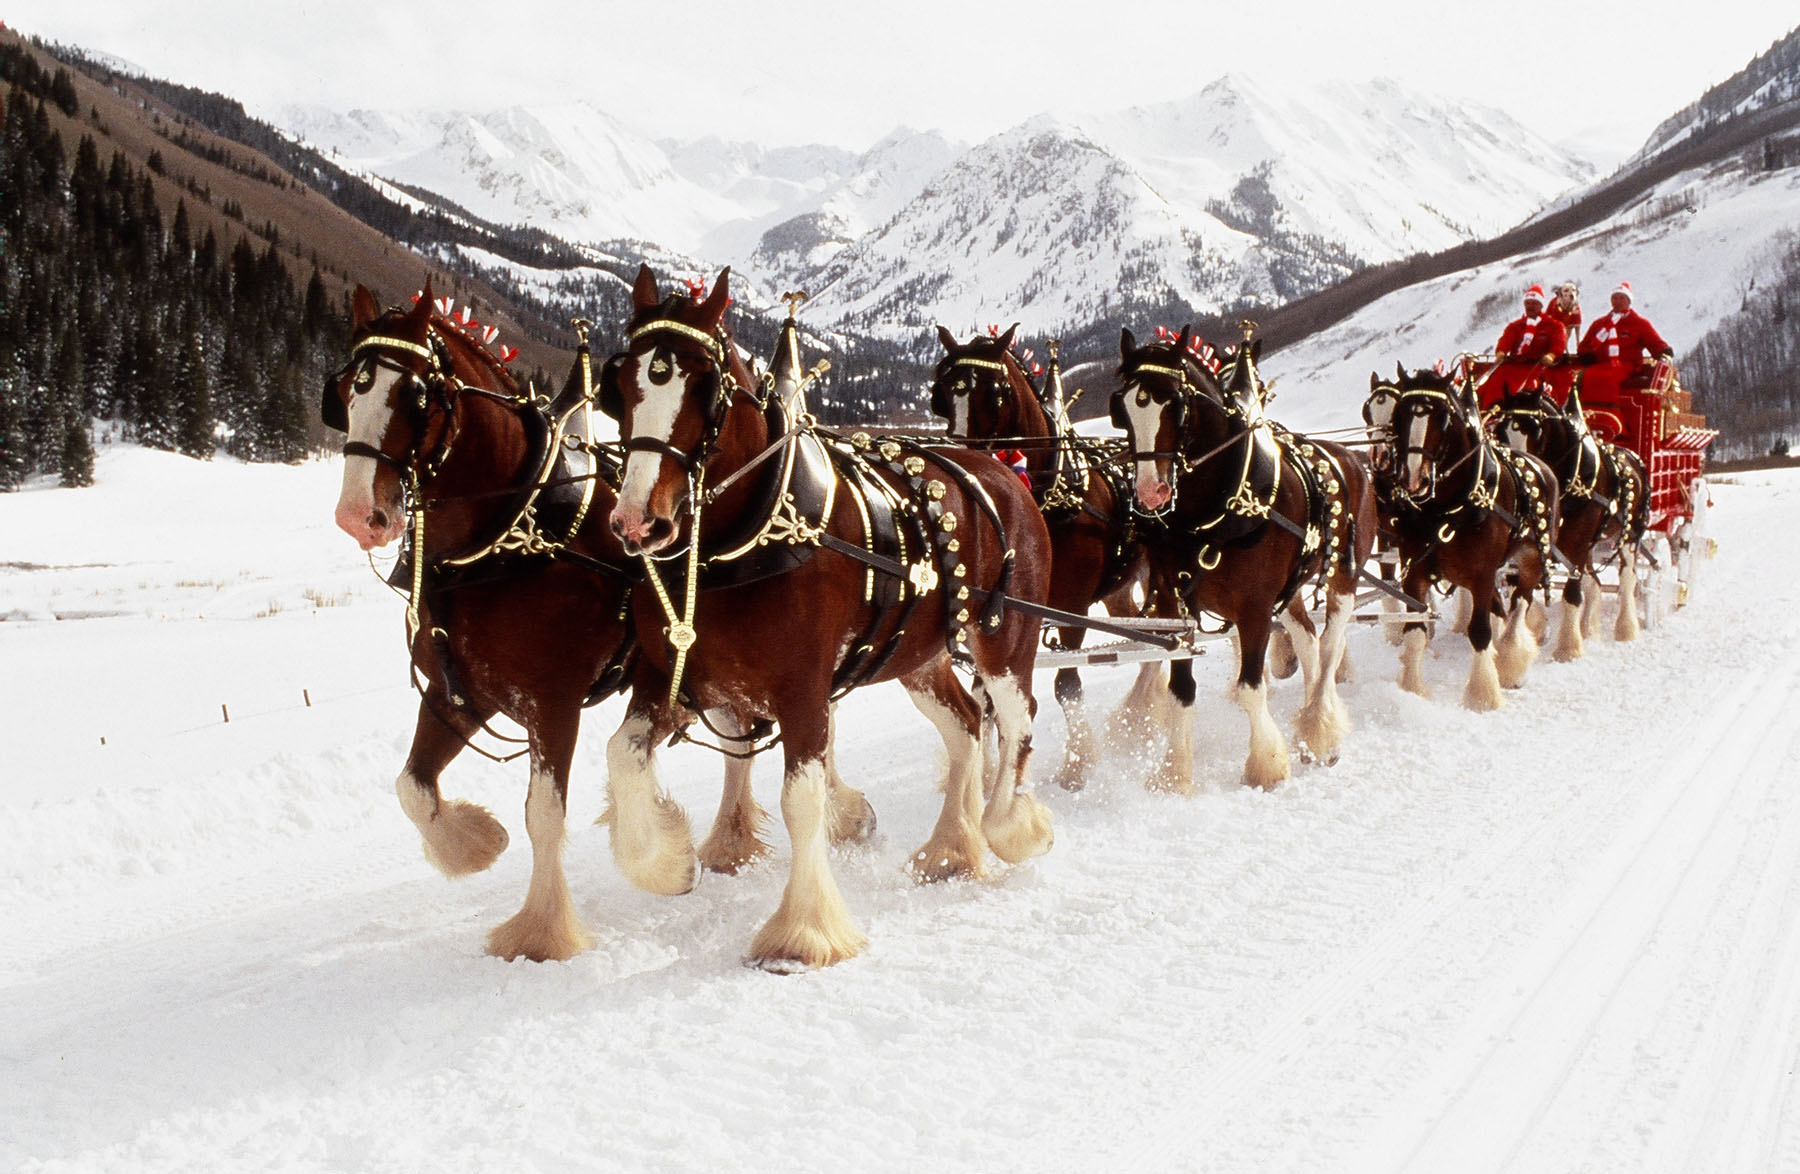 World renowned Budweiser Clydesdales to appear at museum National